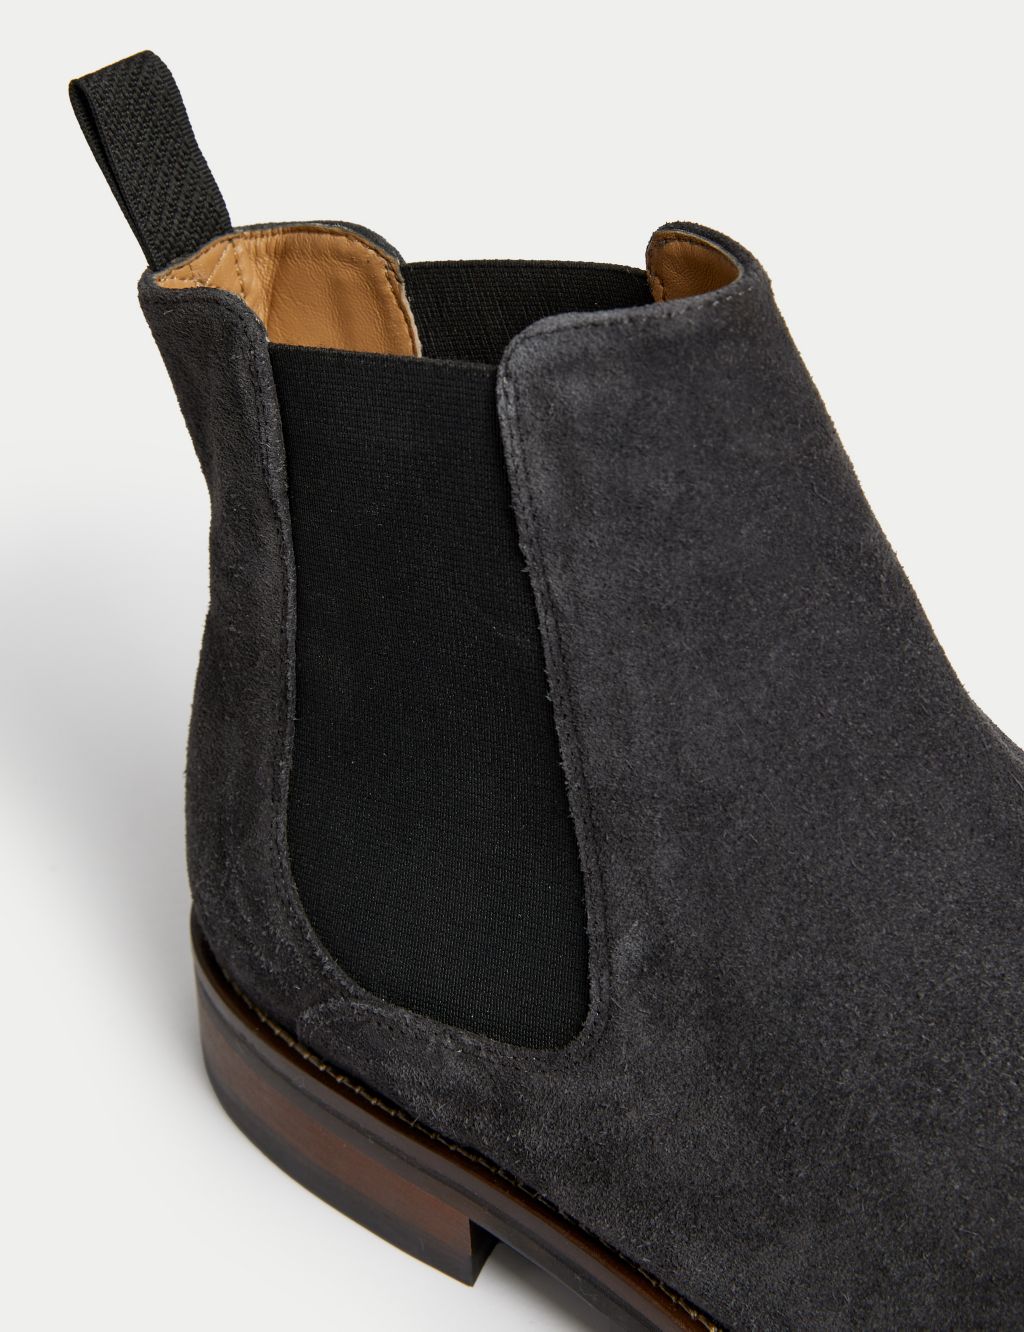 Suede Pull-On Chelsea Boots image 3